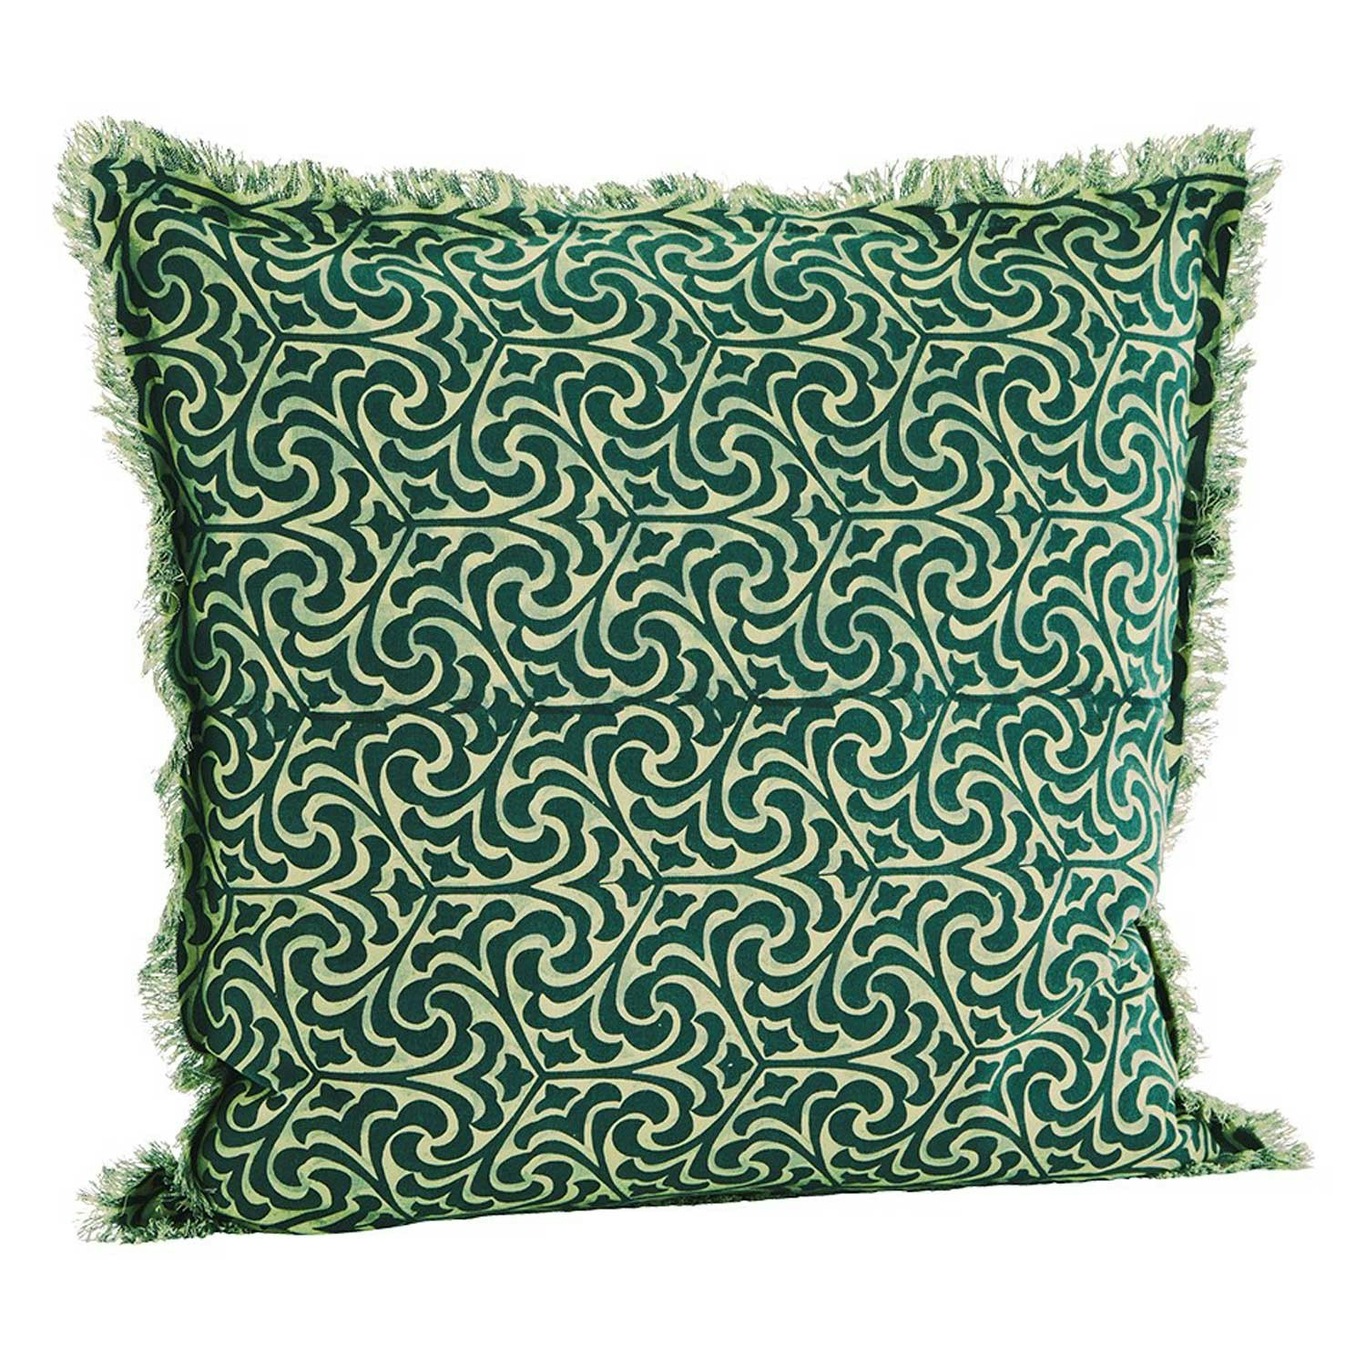 Cushion Cover With Fringes 50x50 cm, Teal/Green